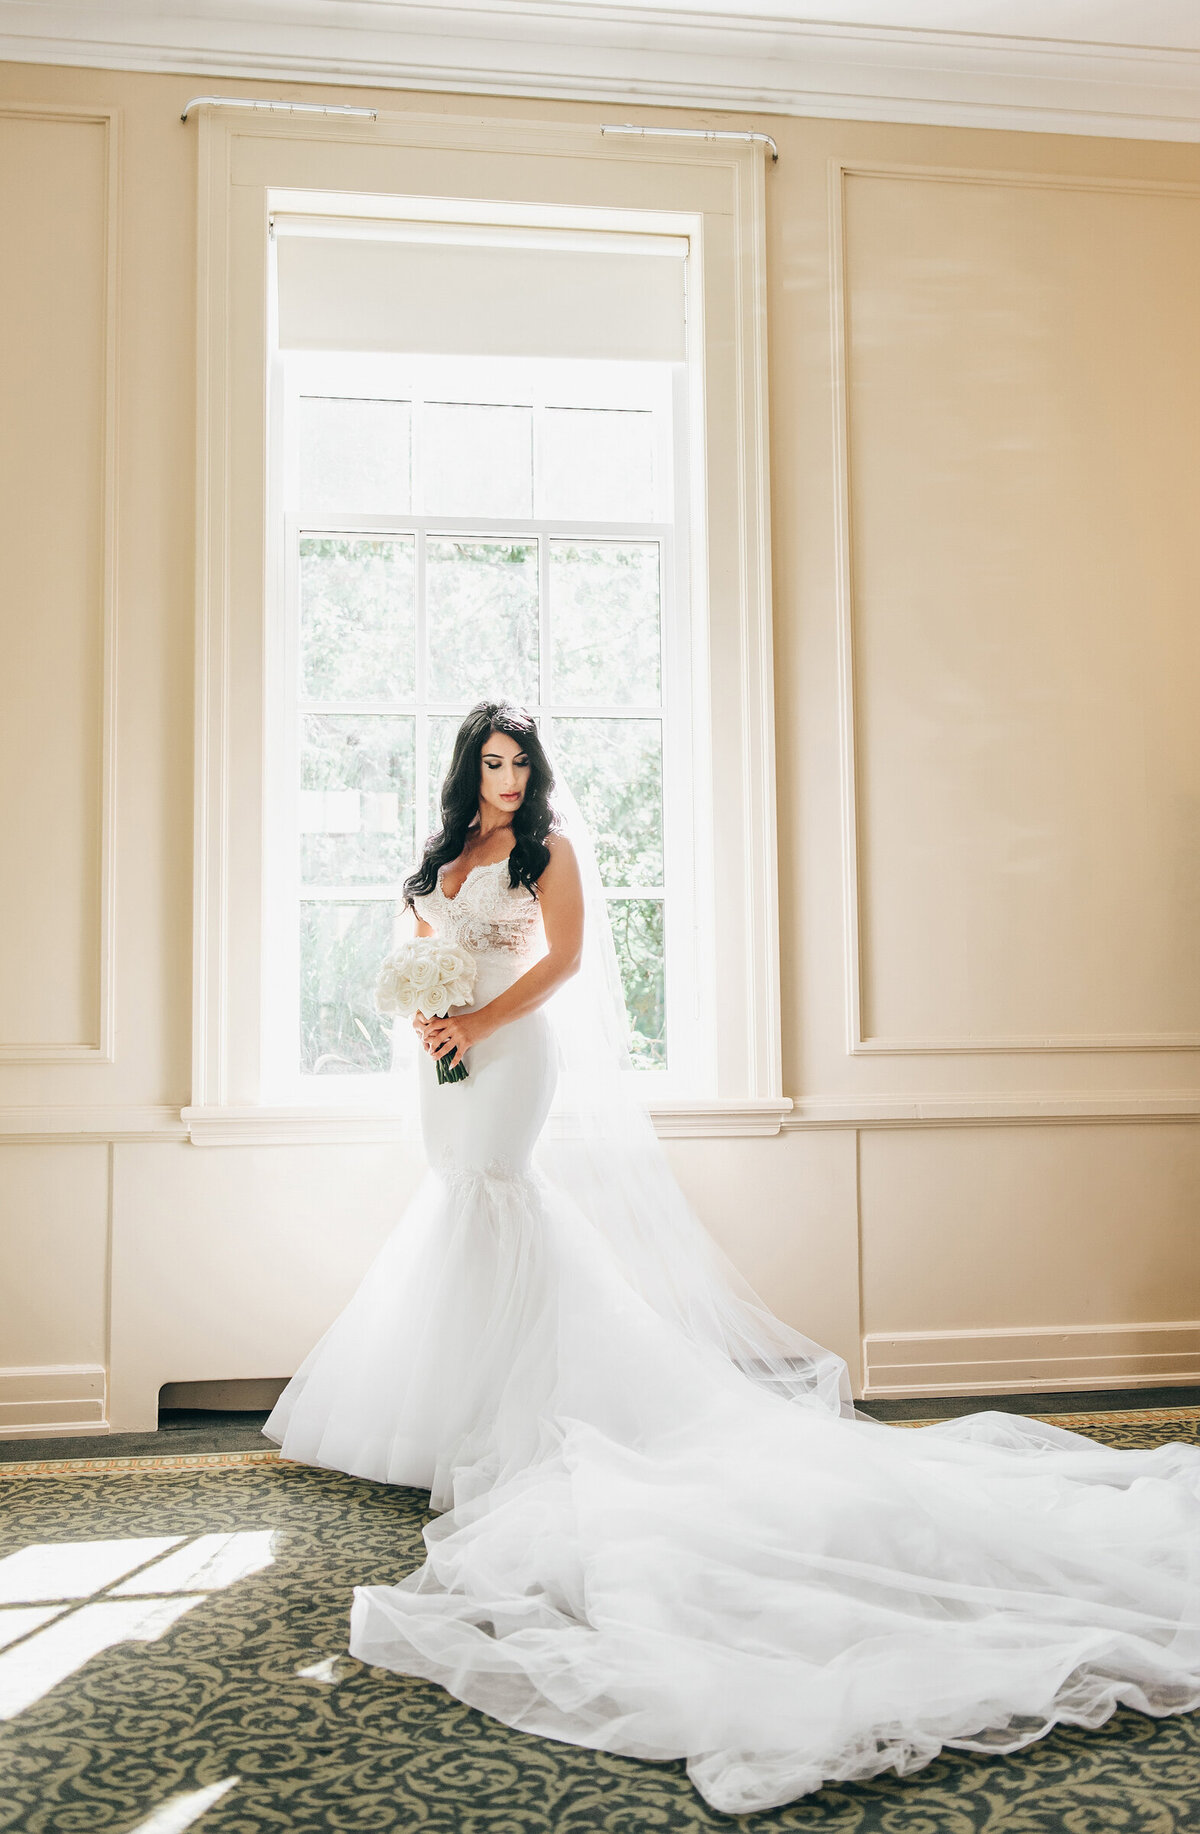 Glamorous bride posing in front of a window on her wedding days